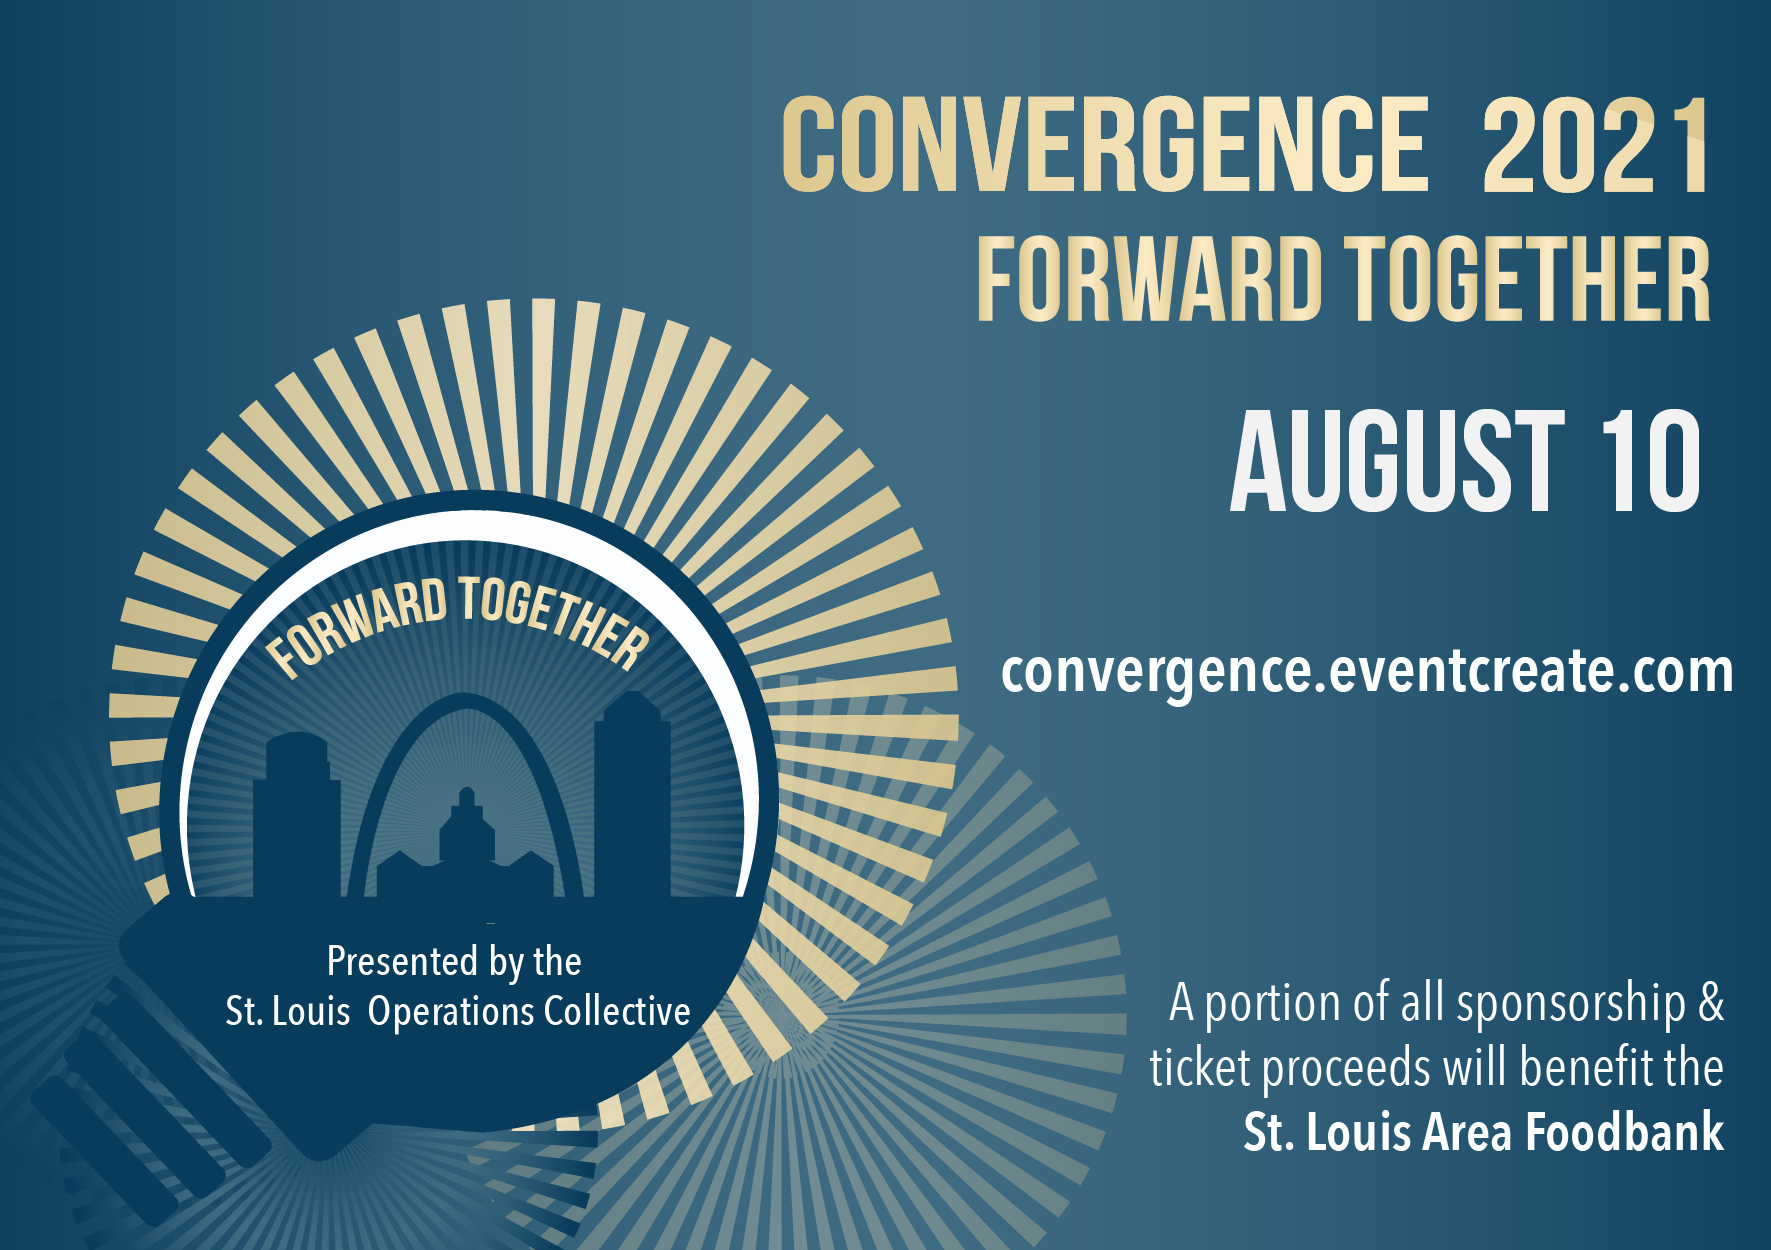 Image of a flyer for Convergence 2021 Forward Together conference